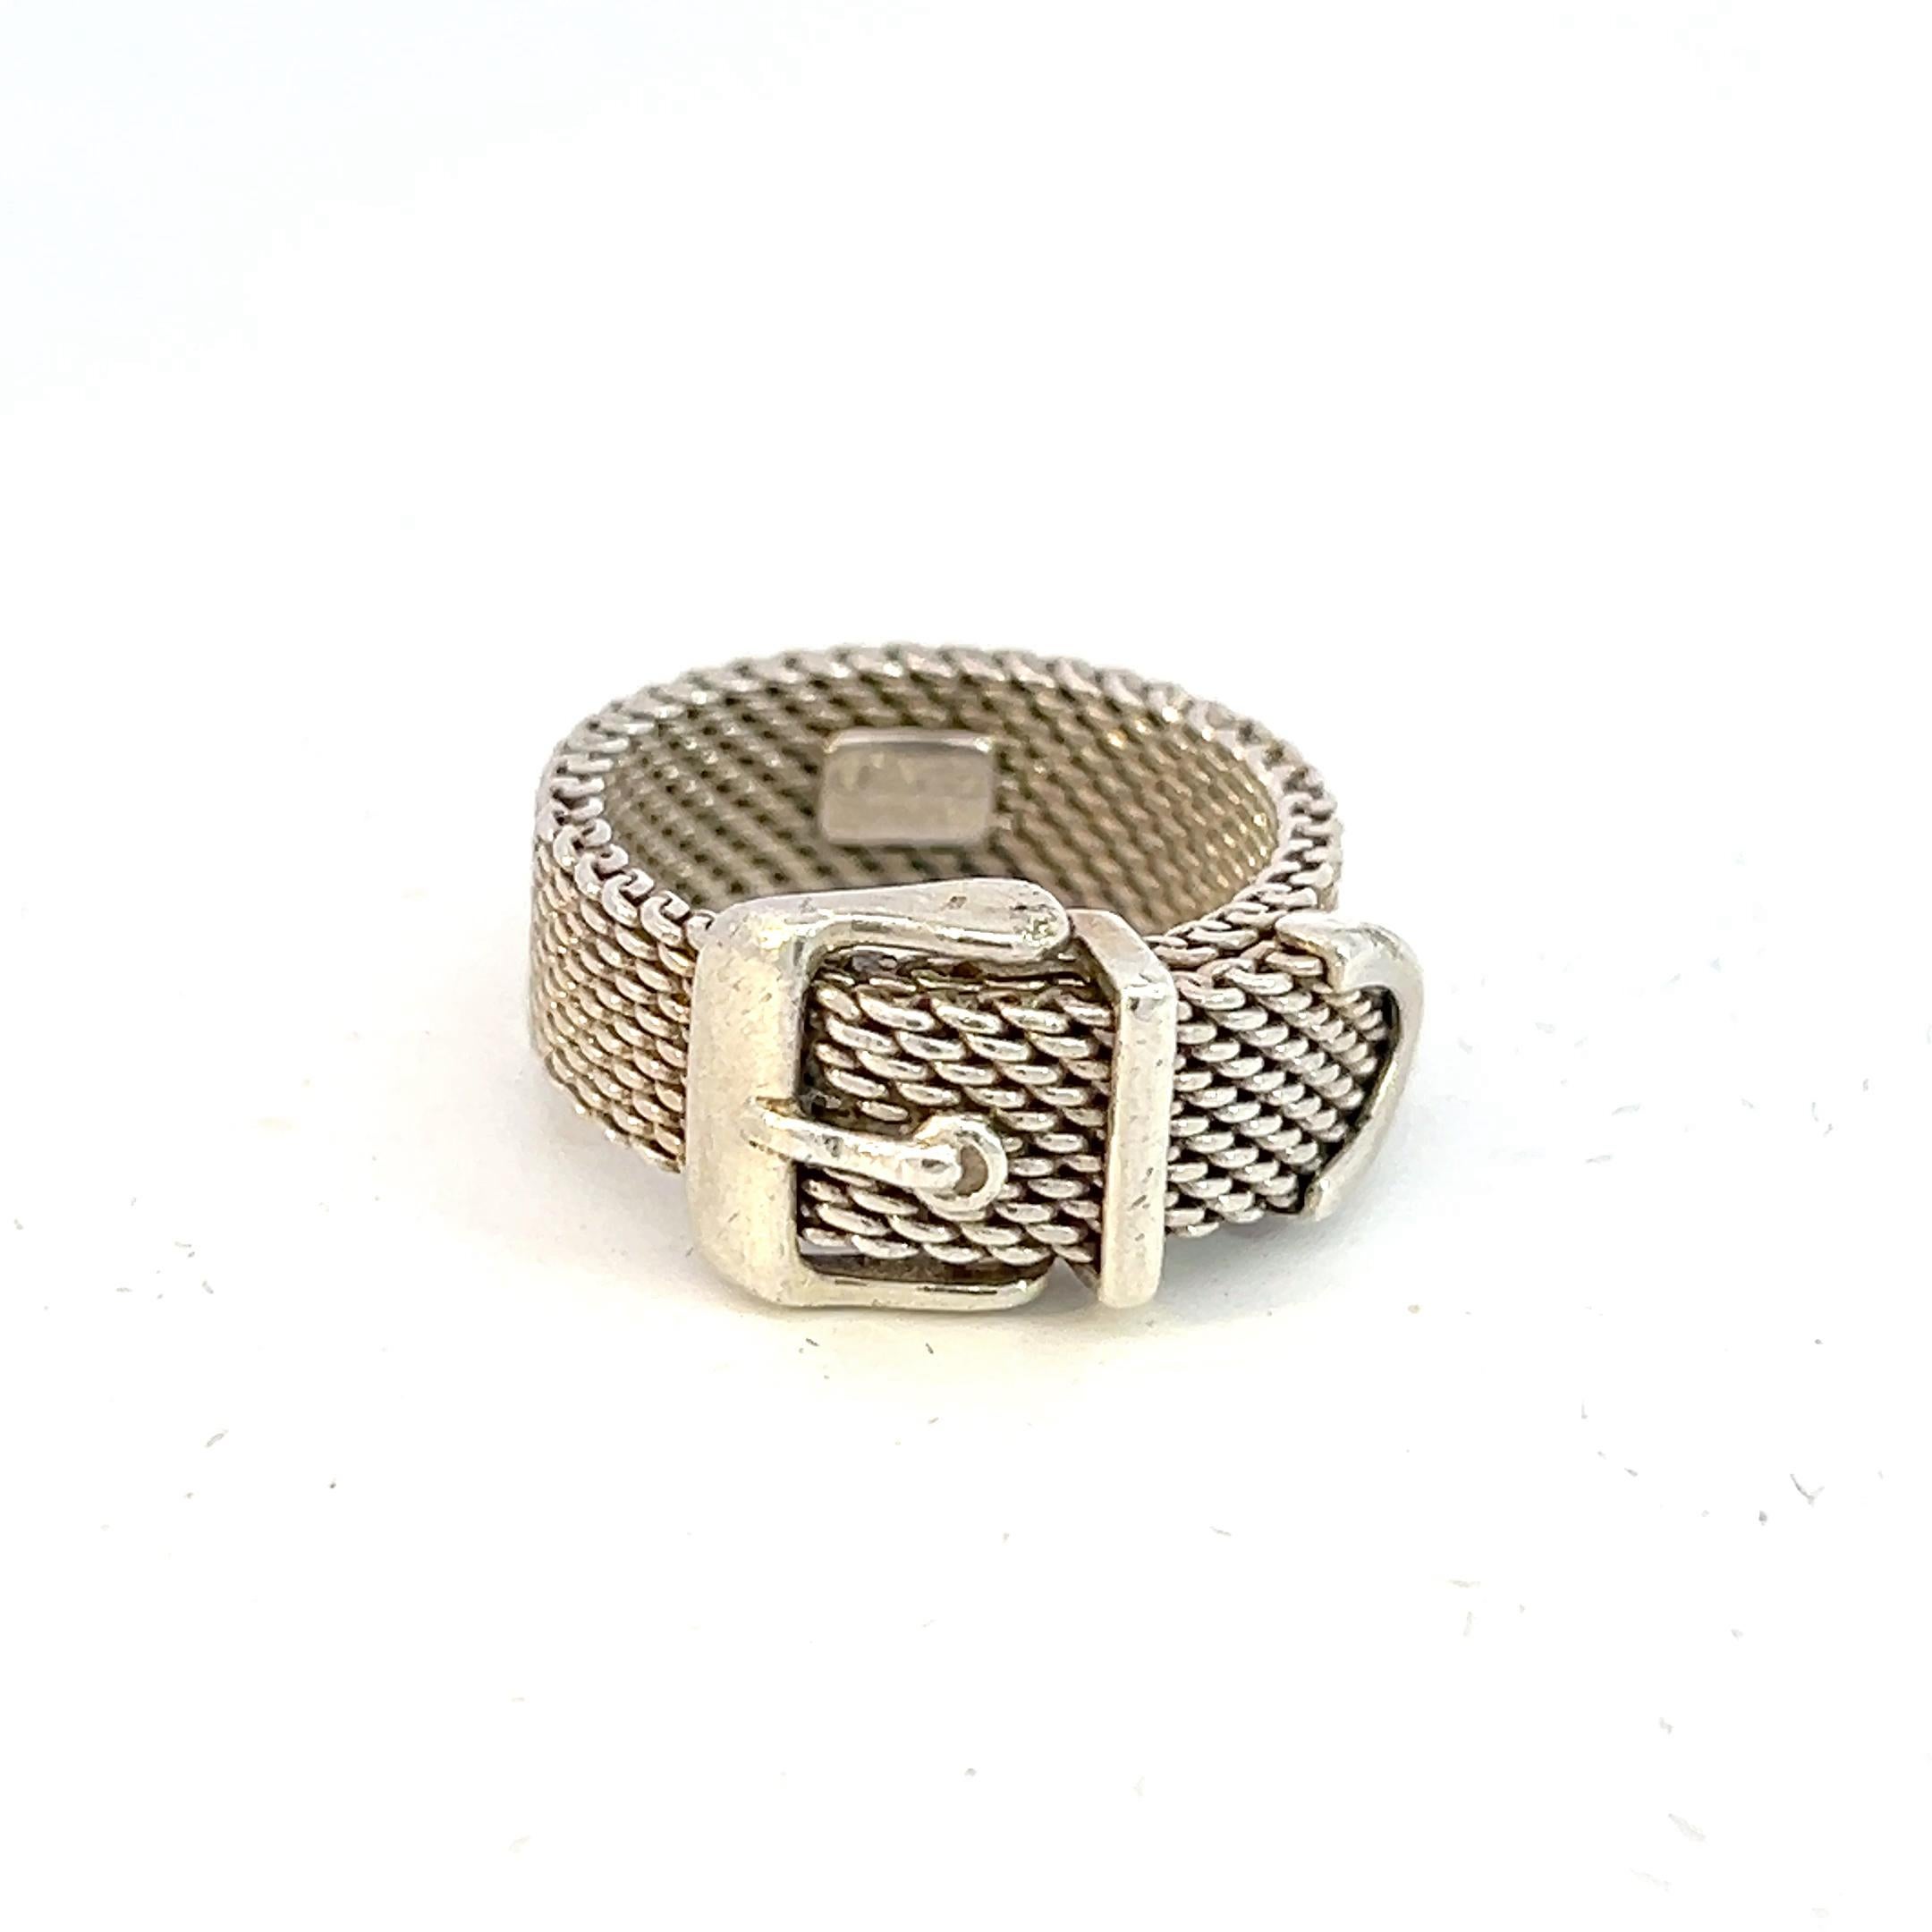 Authentic Tiffany & Co Estate Somerset Buckle Ring Size 3.75 Sterling Silver TIF564

TRUSTED SELLER SINCE 2002

PLEASE SEE OUR HUNDREDS OF POSITIVE FEEDBACKS FROM OUR CLIENTS!!

FREE SHIPPING

DETAILS
Style: Somerset Buckle
Ring Size: 3.75
Metal: